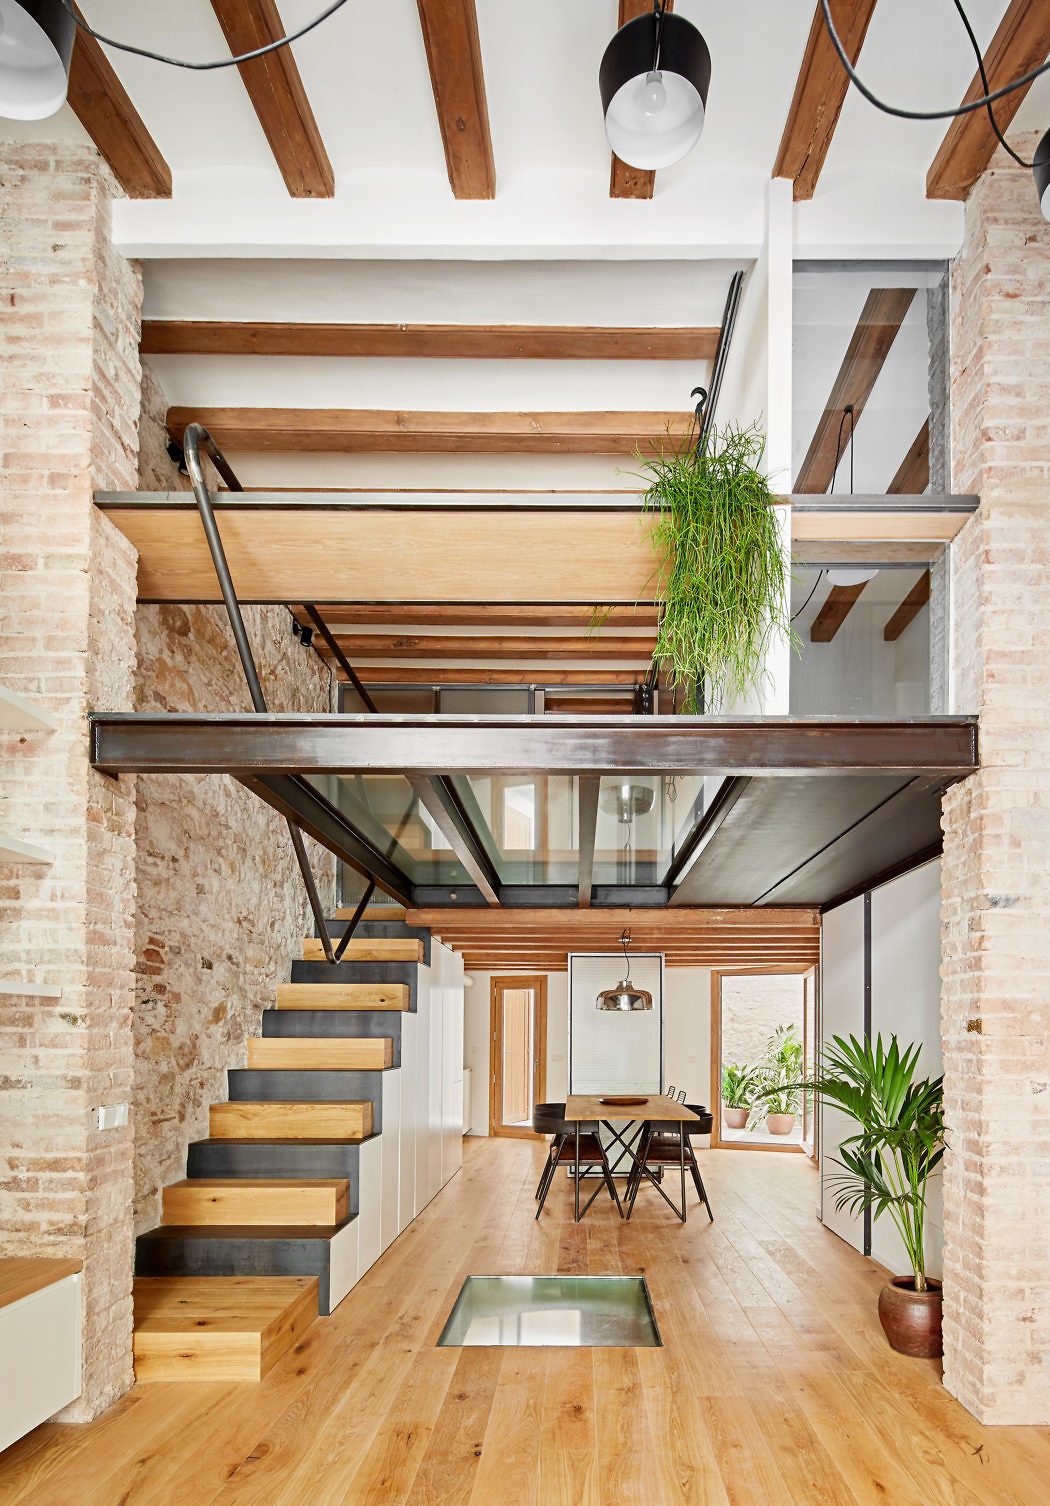 Modern interior with exposed brick, wooden beams, floating staircase, and hanging plants.